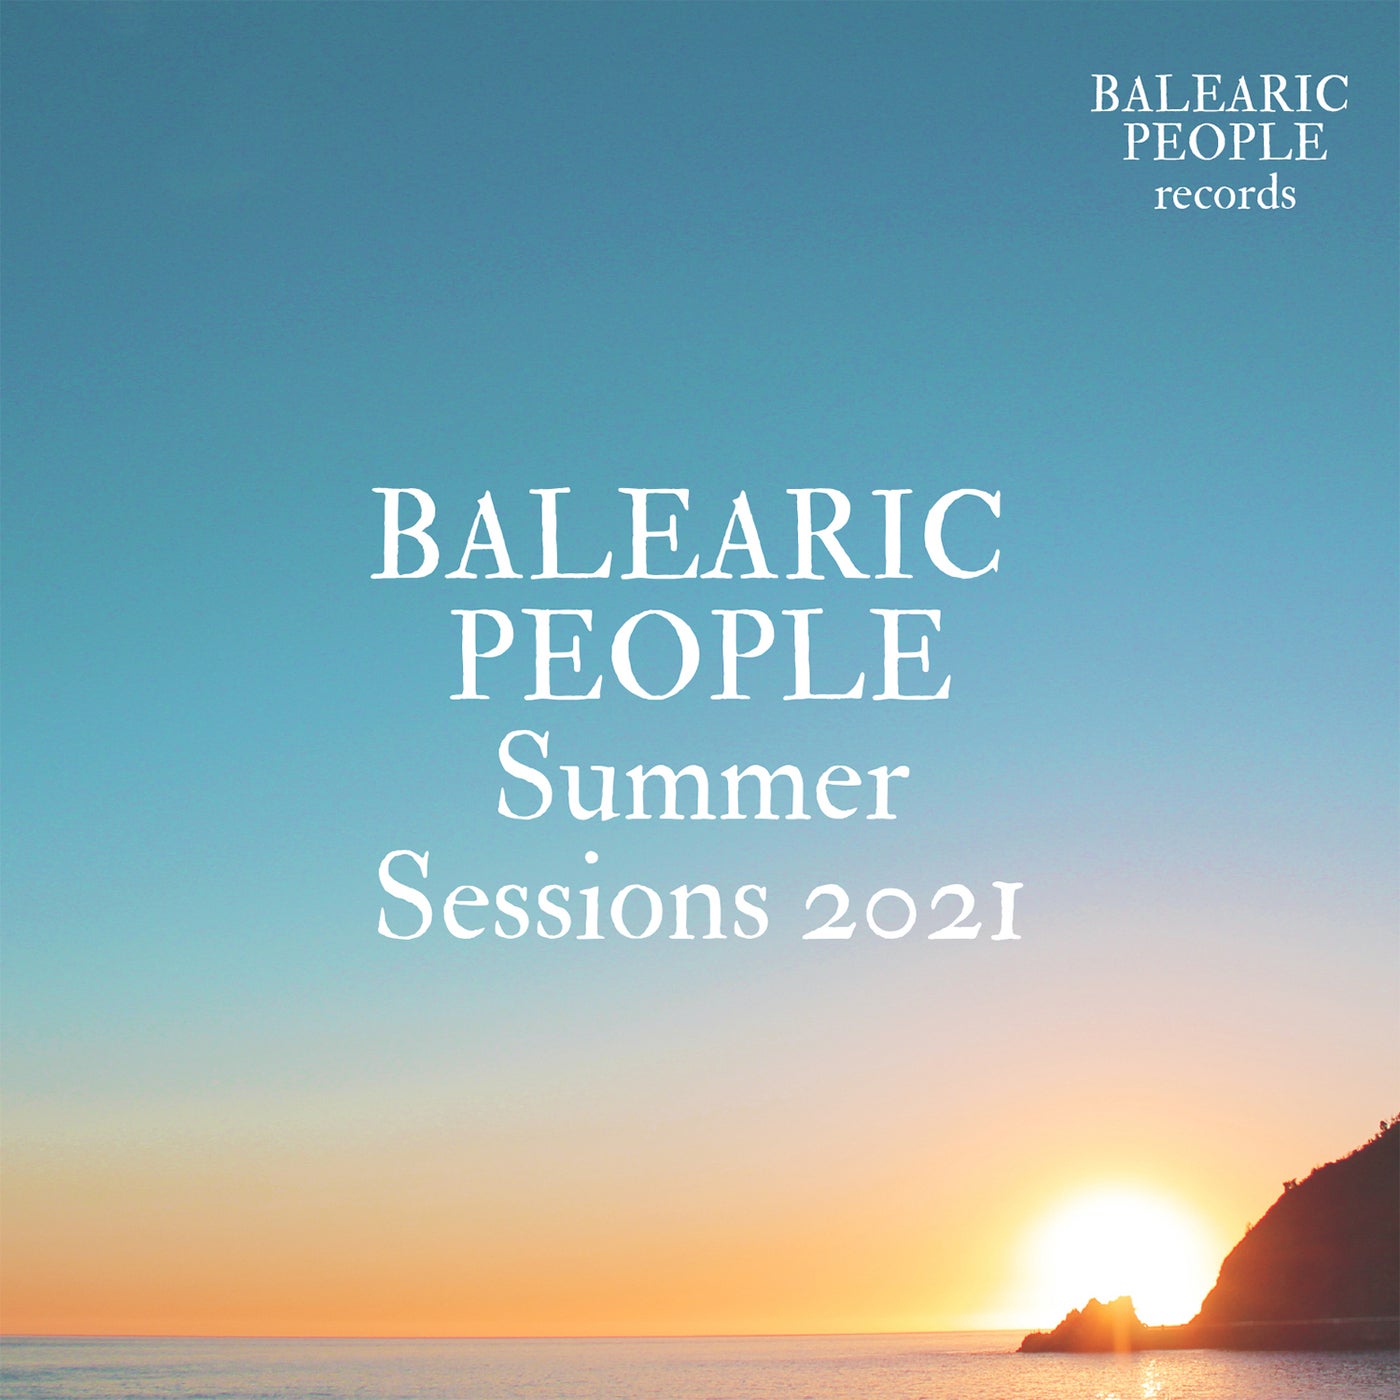 Balearic People - Summer Sessions 2021